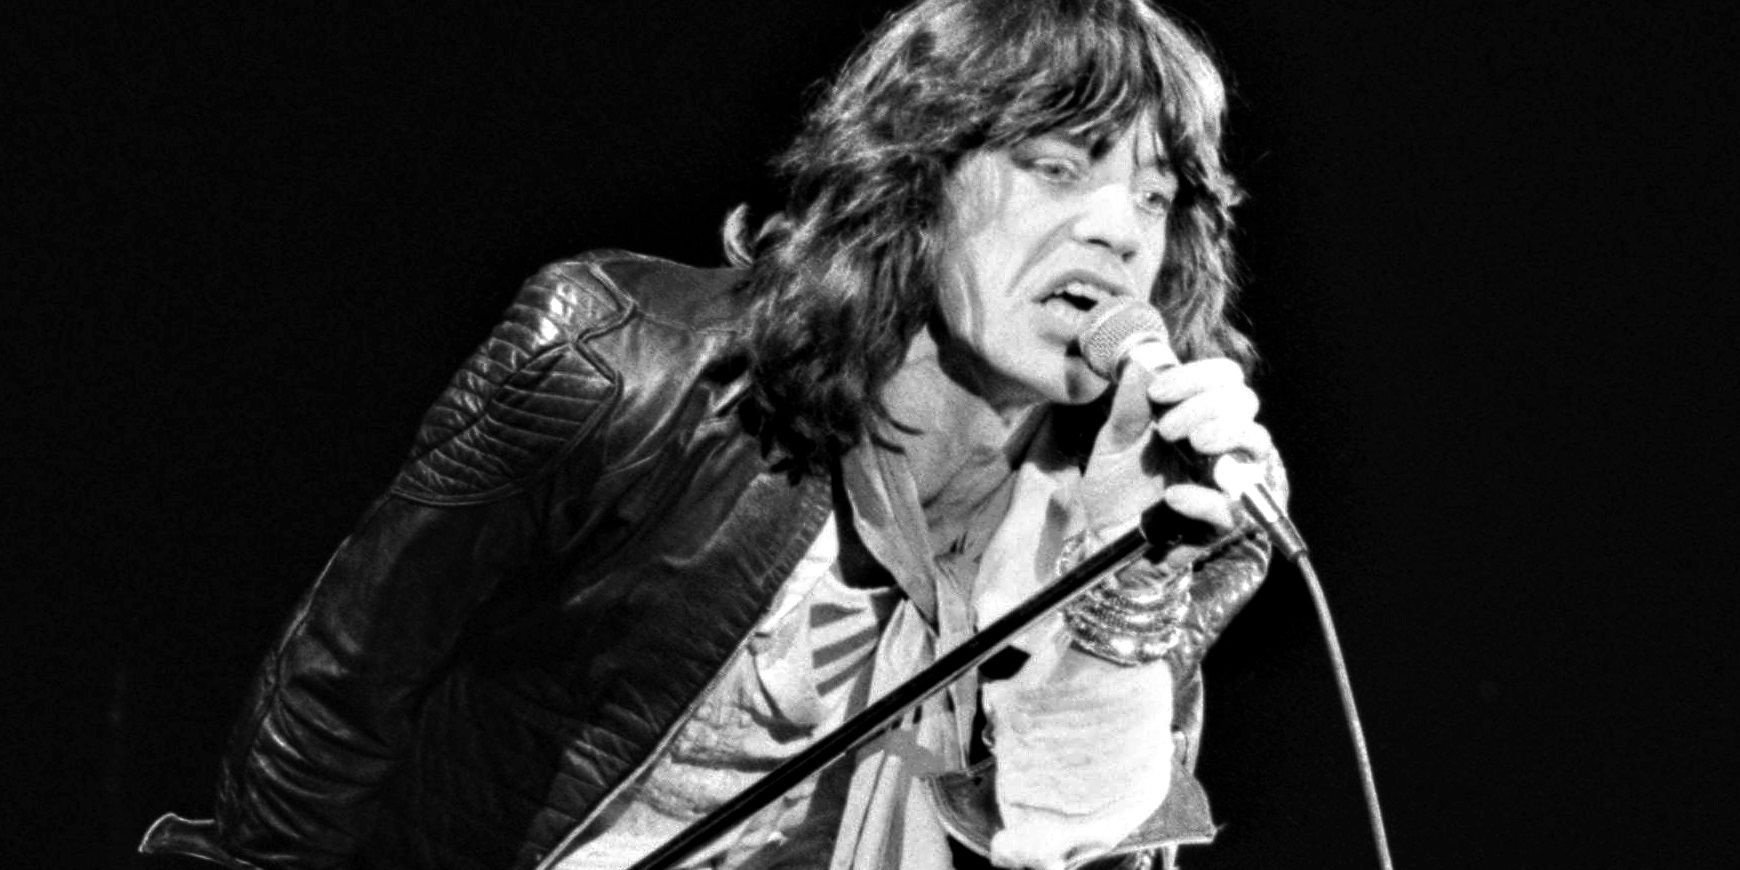 Mick Jagger performing live on stage